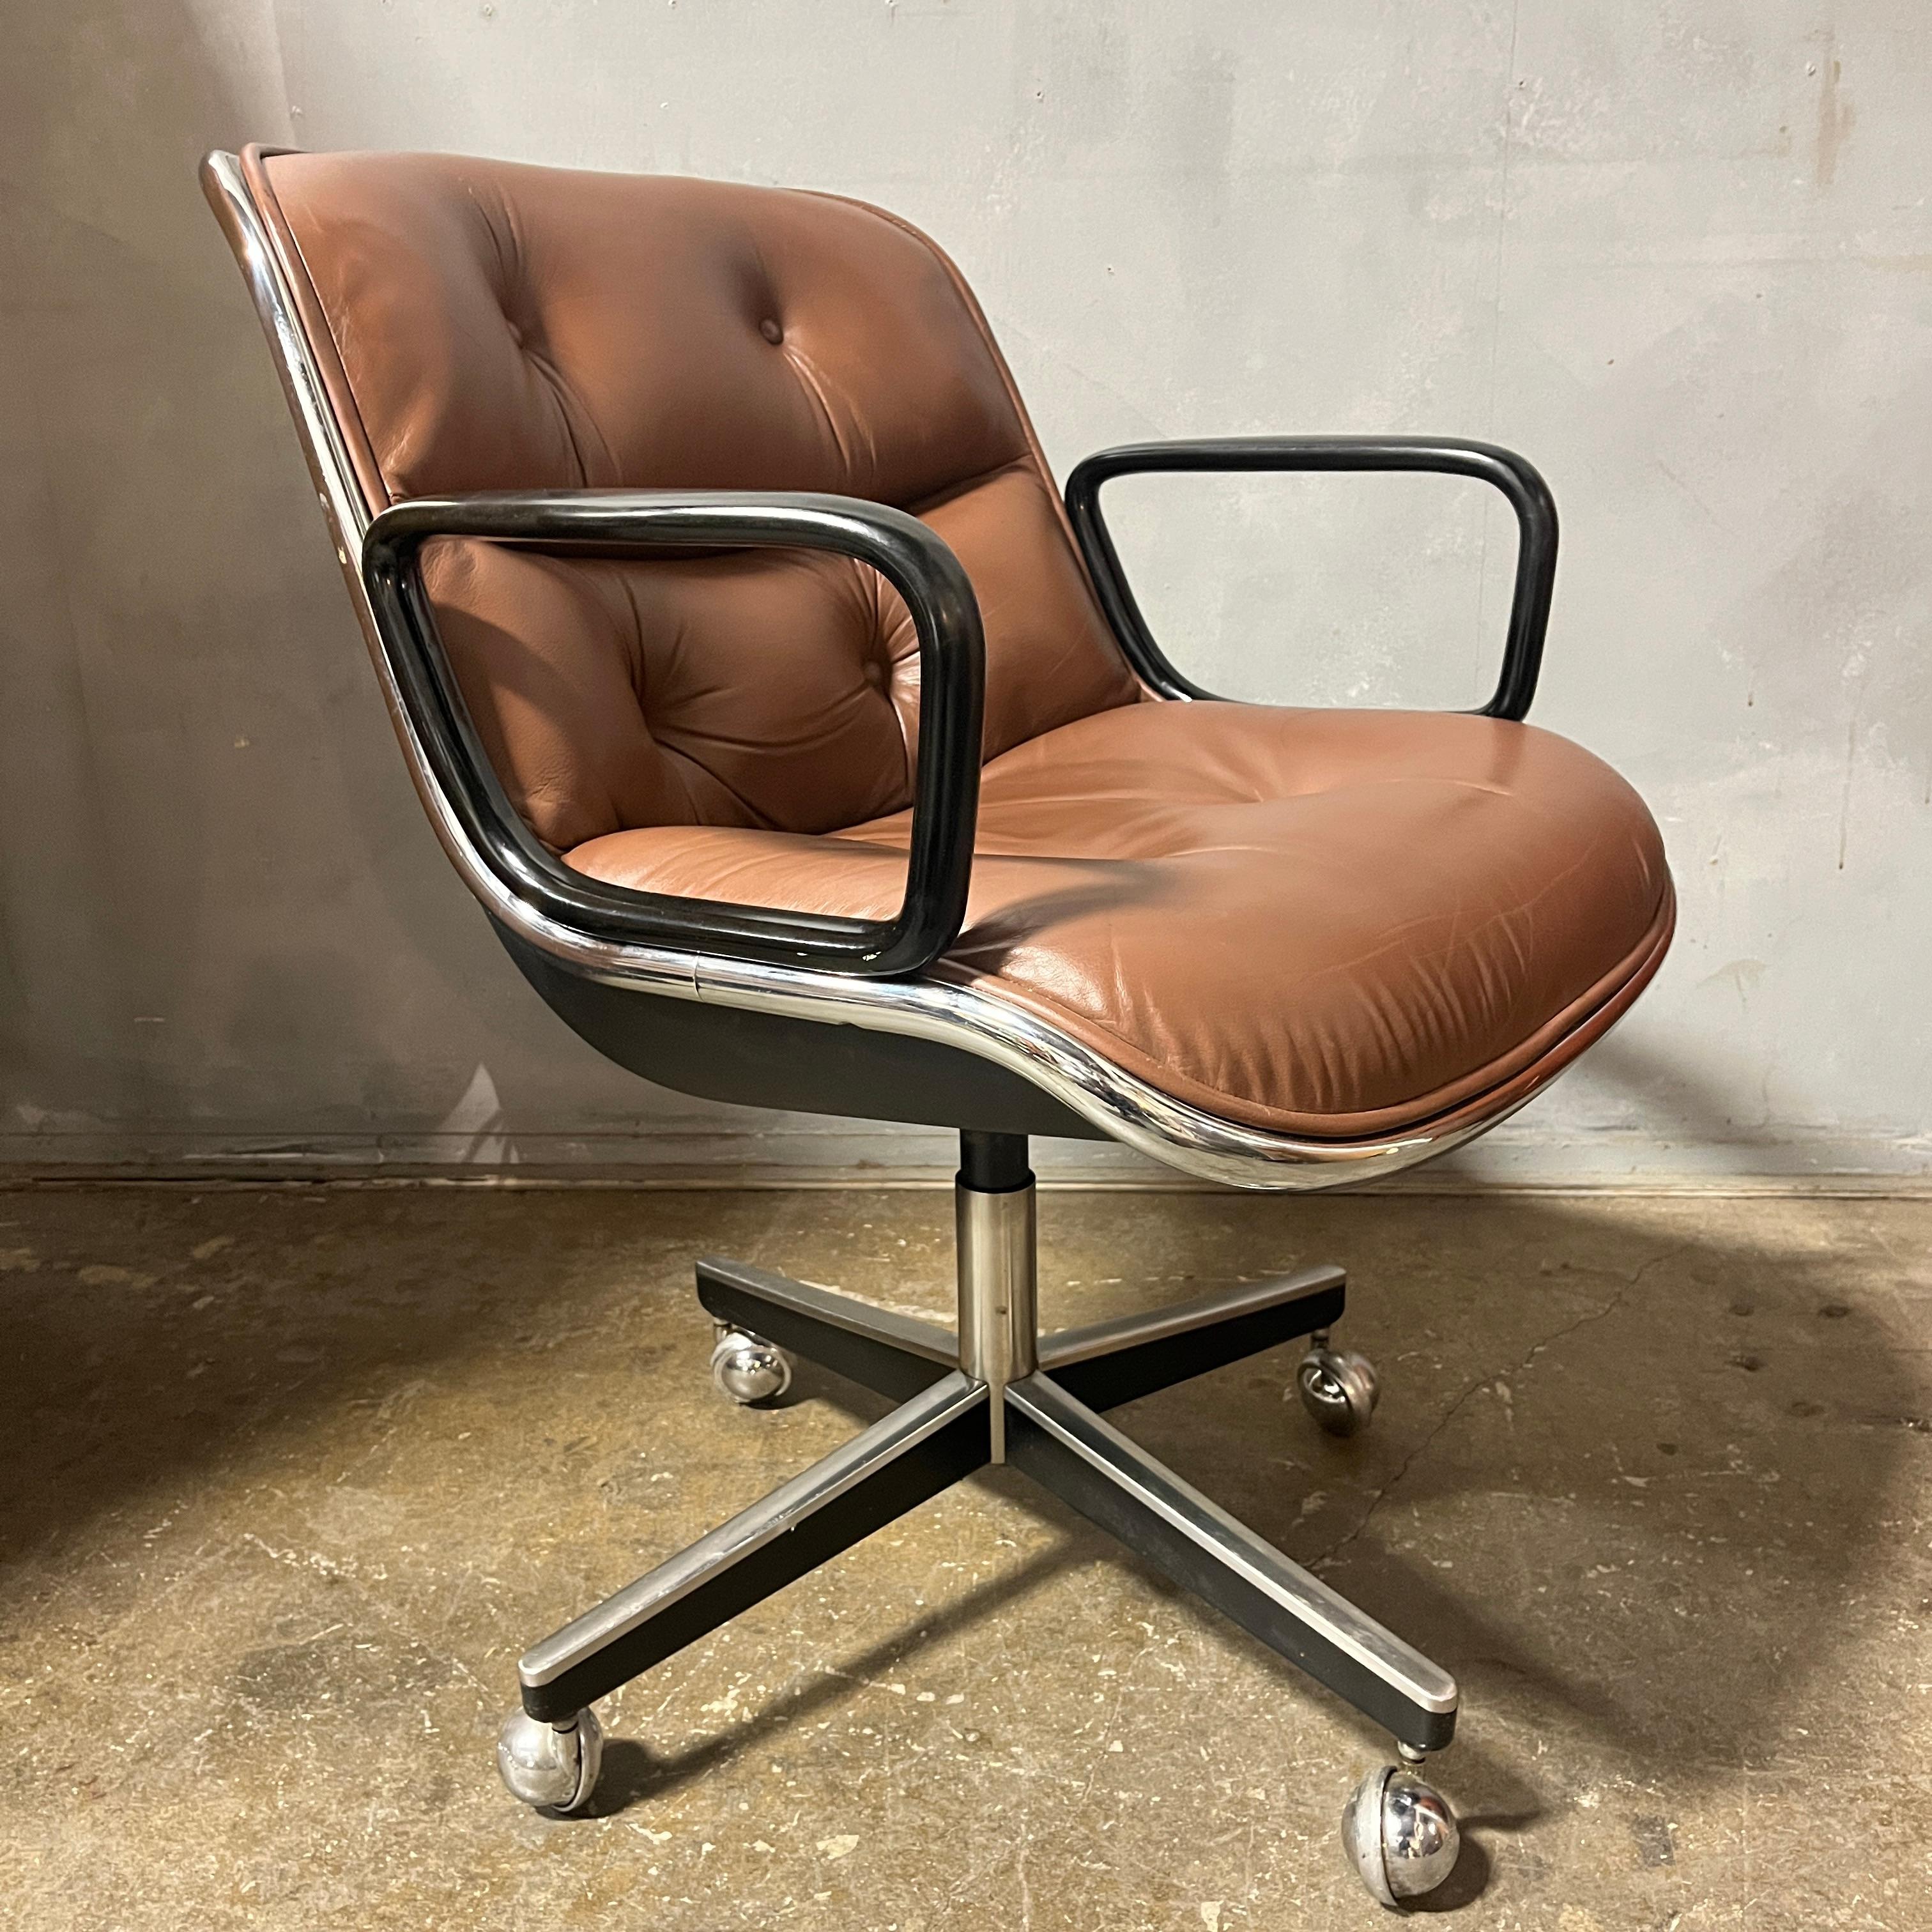 20th Century Executive Chair by Charles Pollock for Knoll